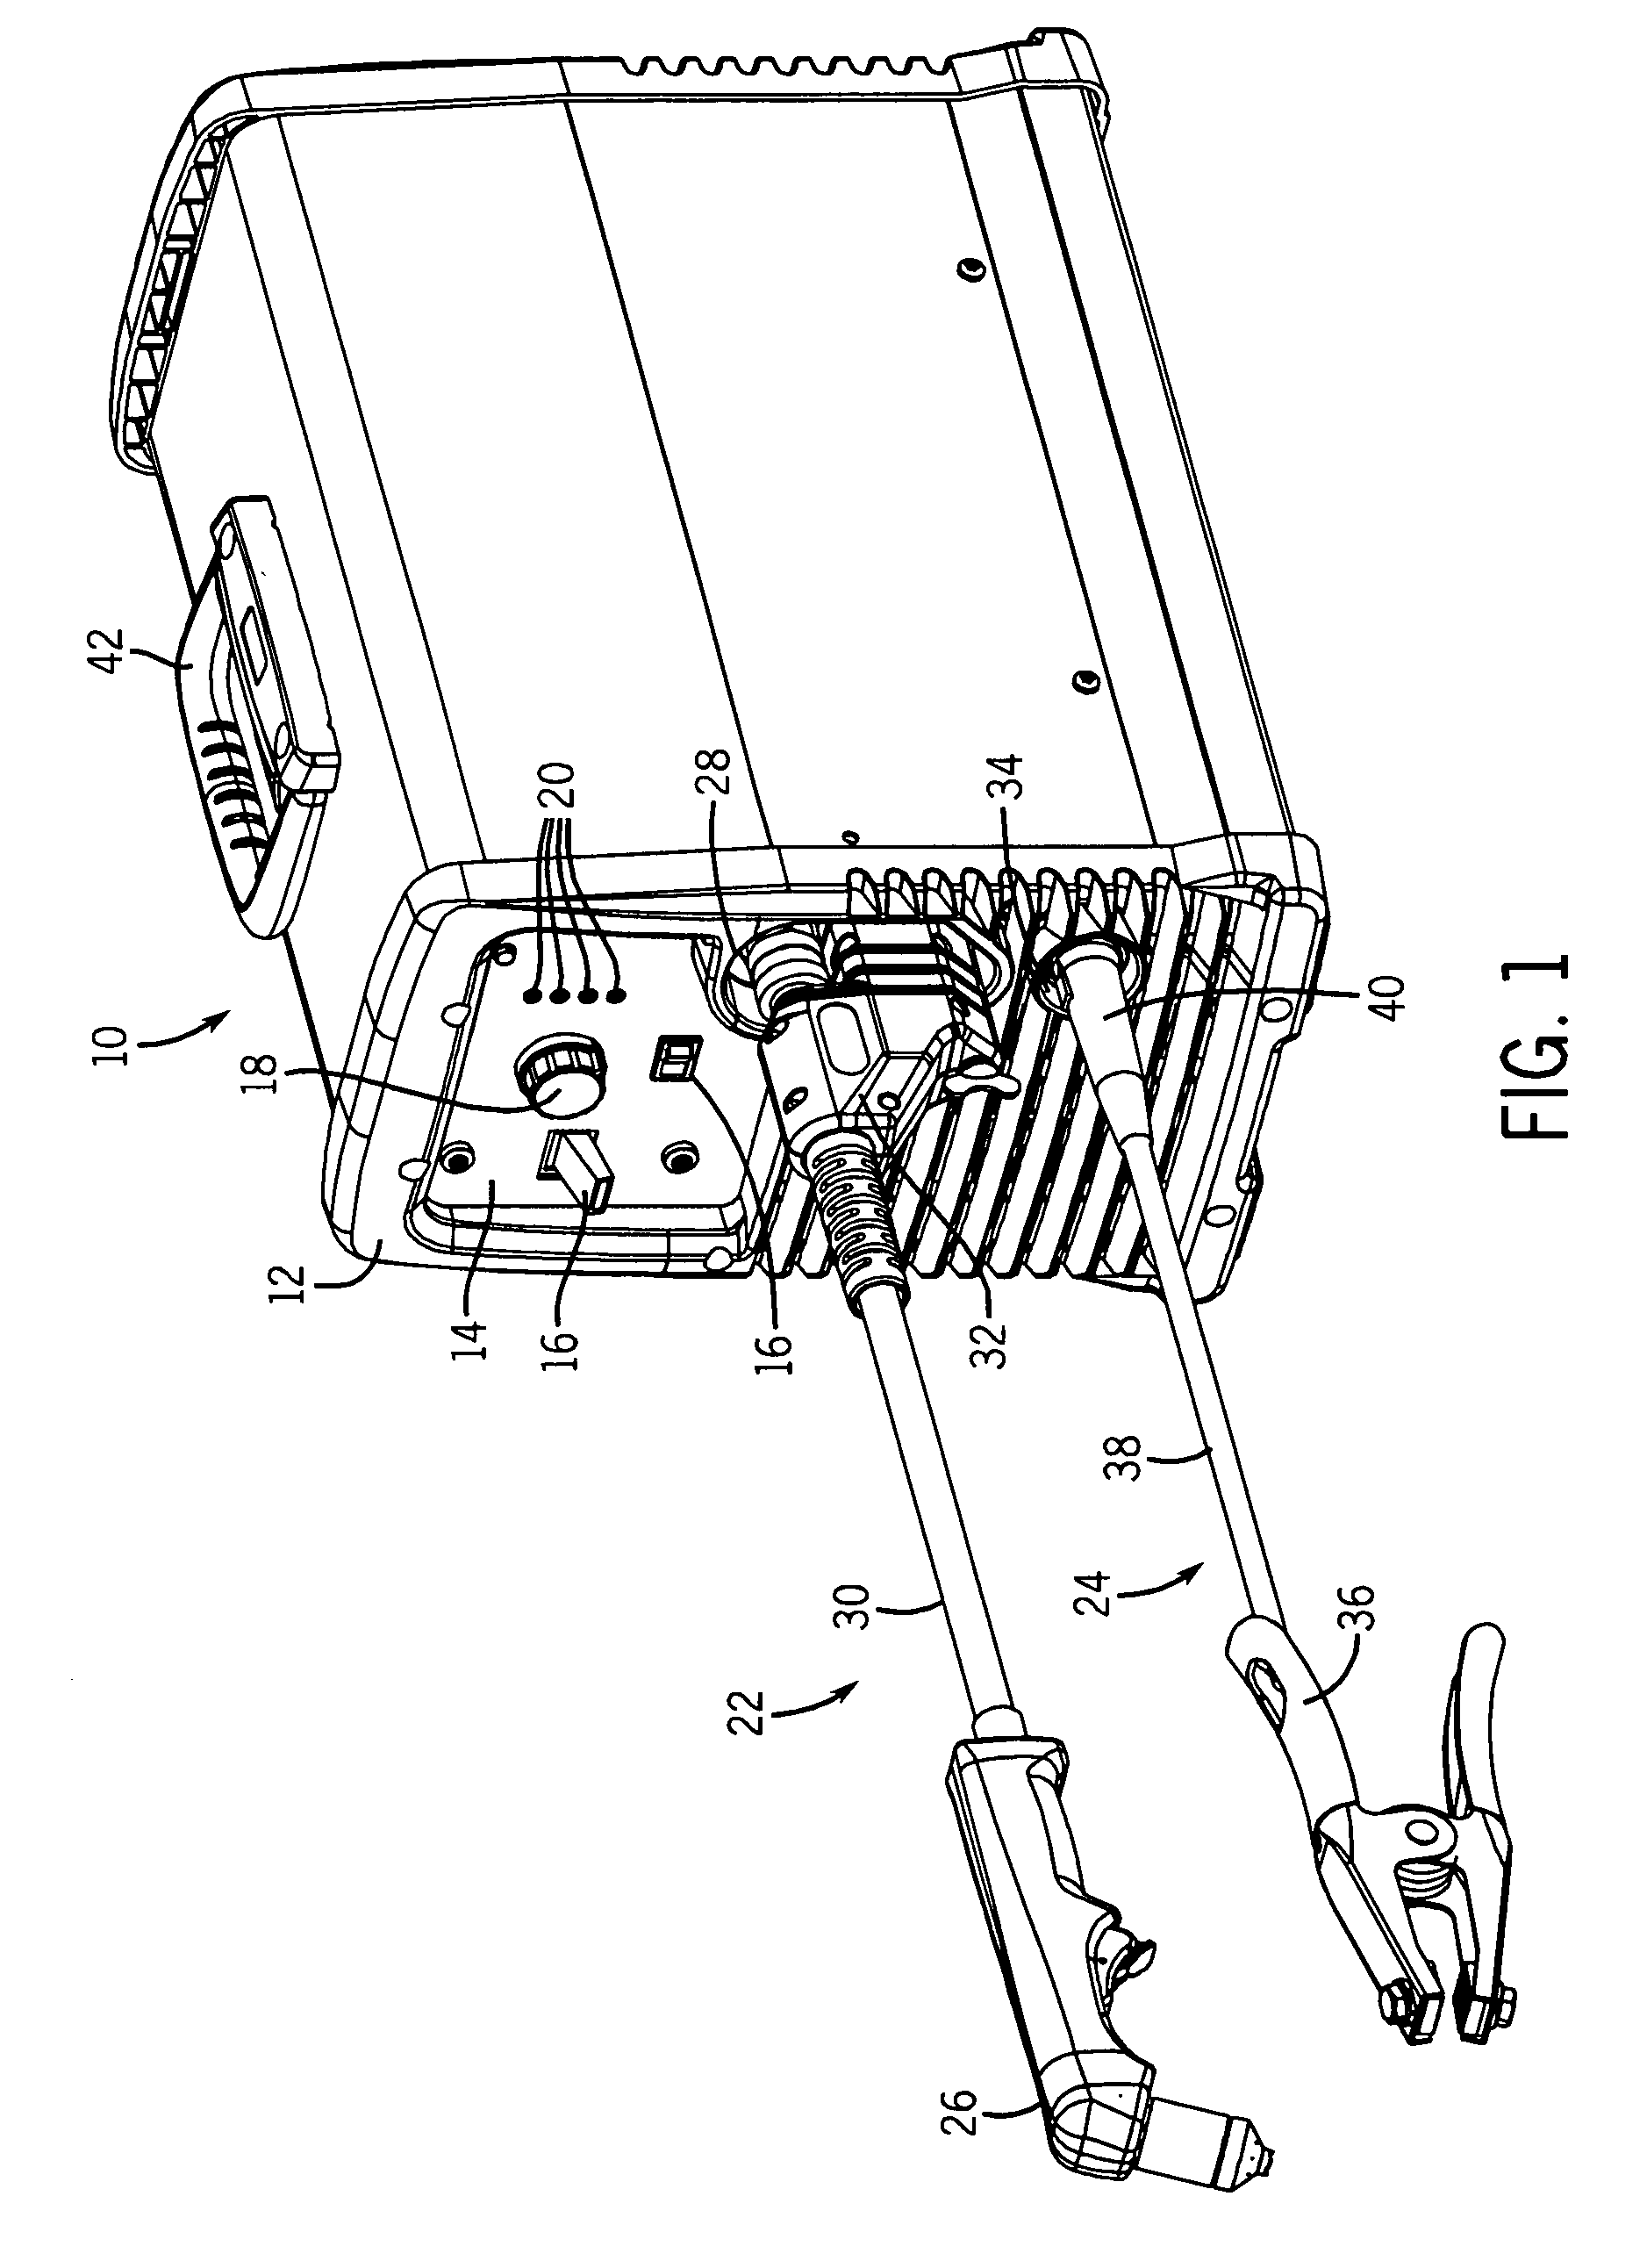 Plasma cutter with disconnectable torch and work assemblies